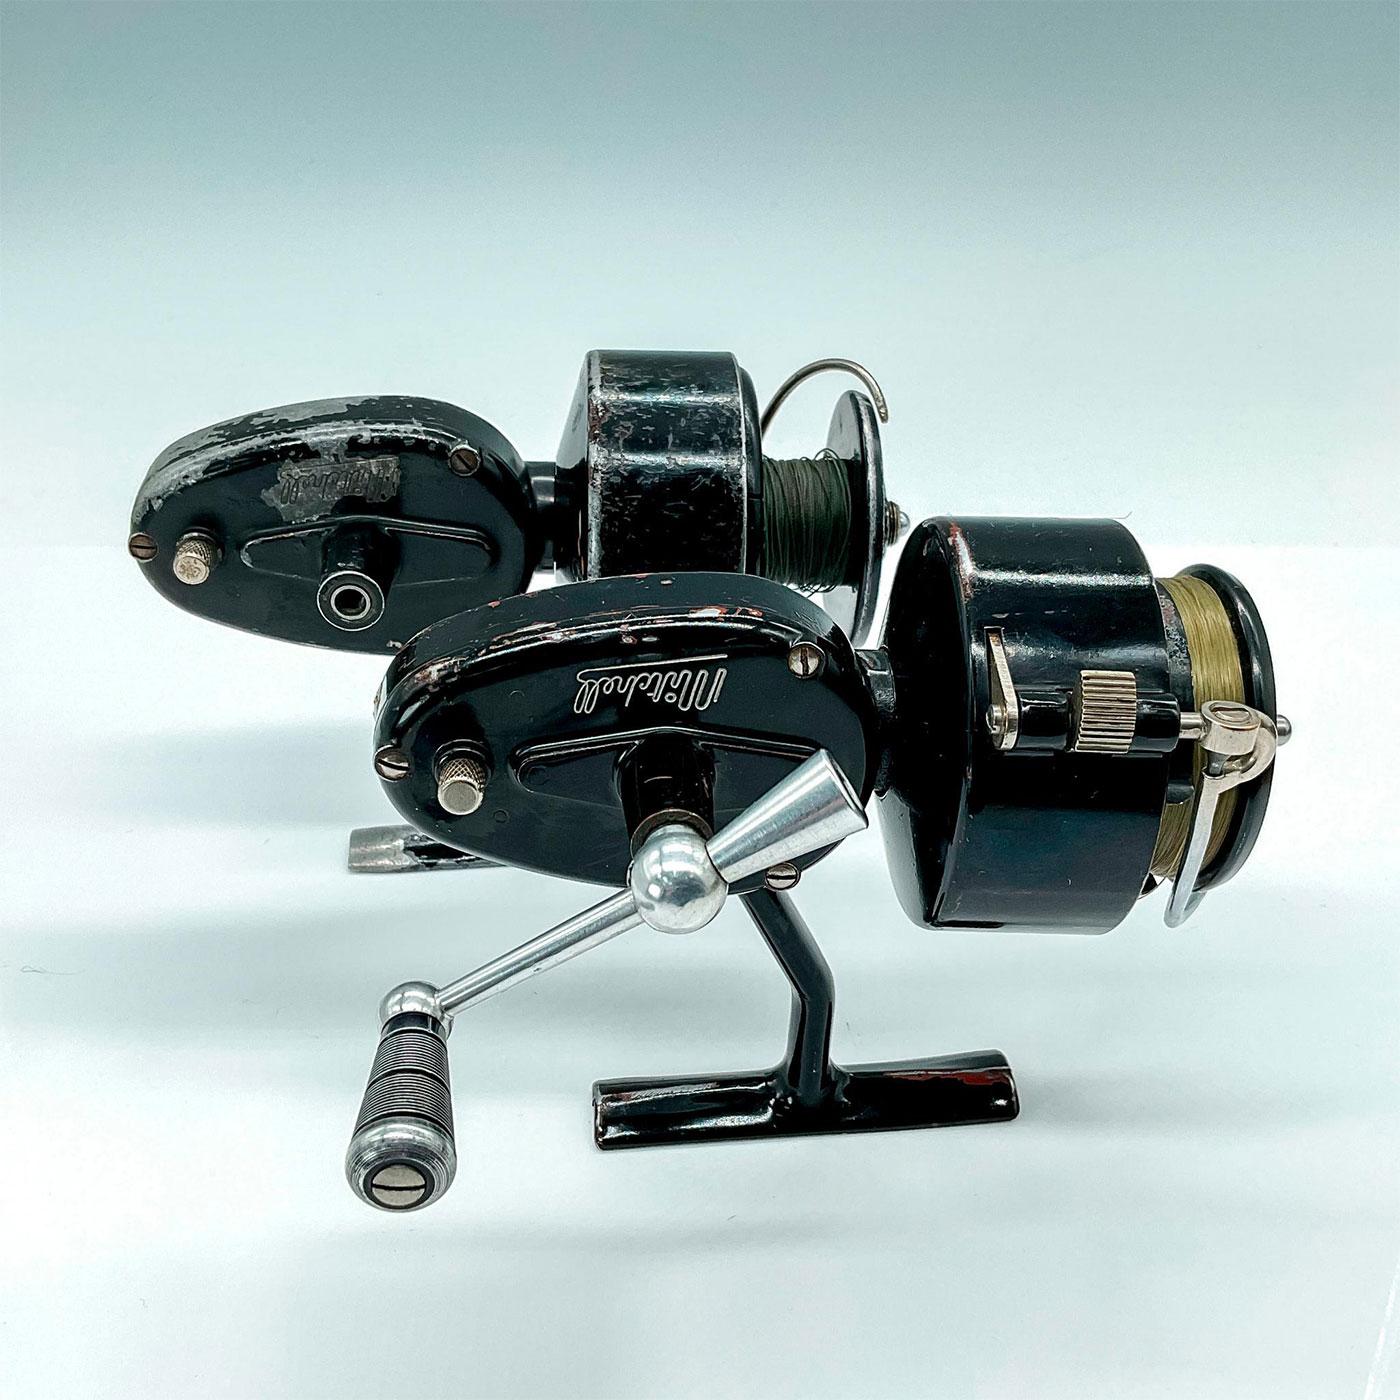 2nd Version Mitchell Half-Bail Fishing Reel. Made in France.